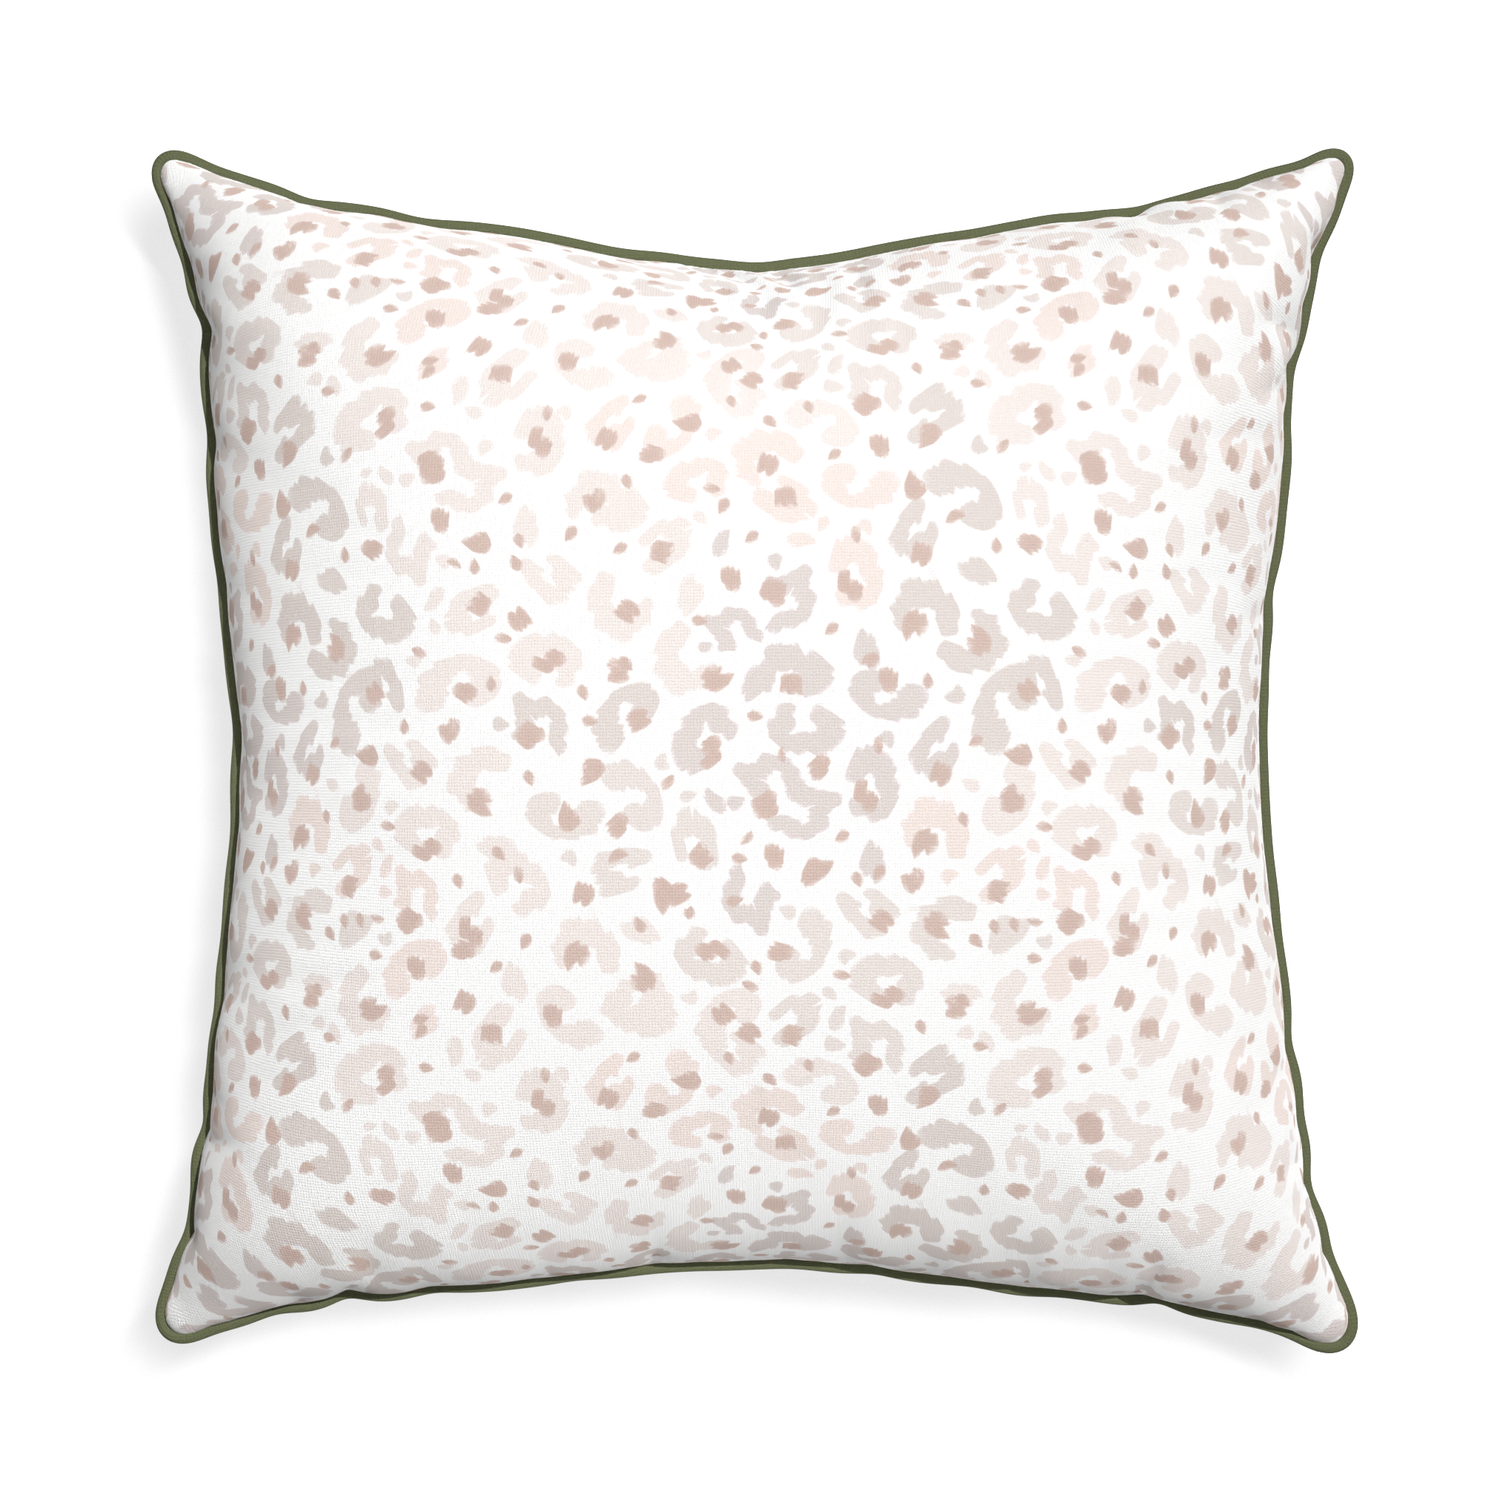 Euro-sham rosie custom pillow with f piping on white background